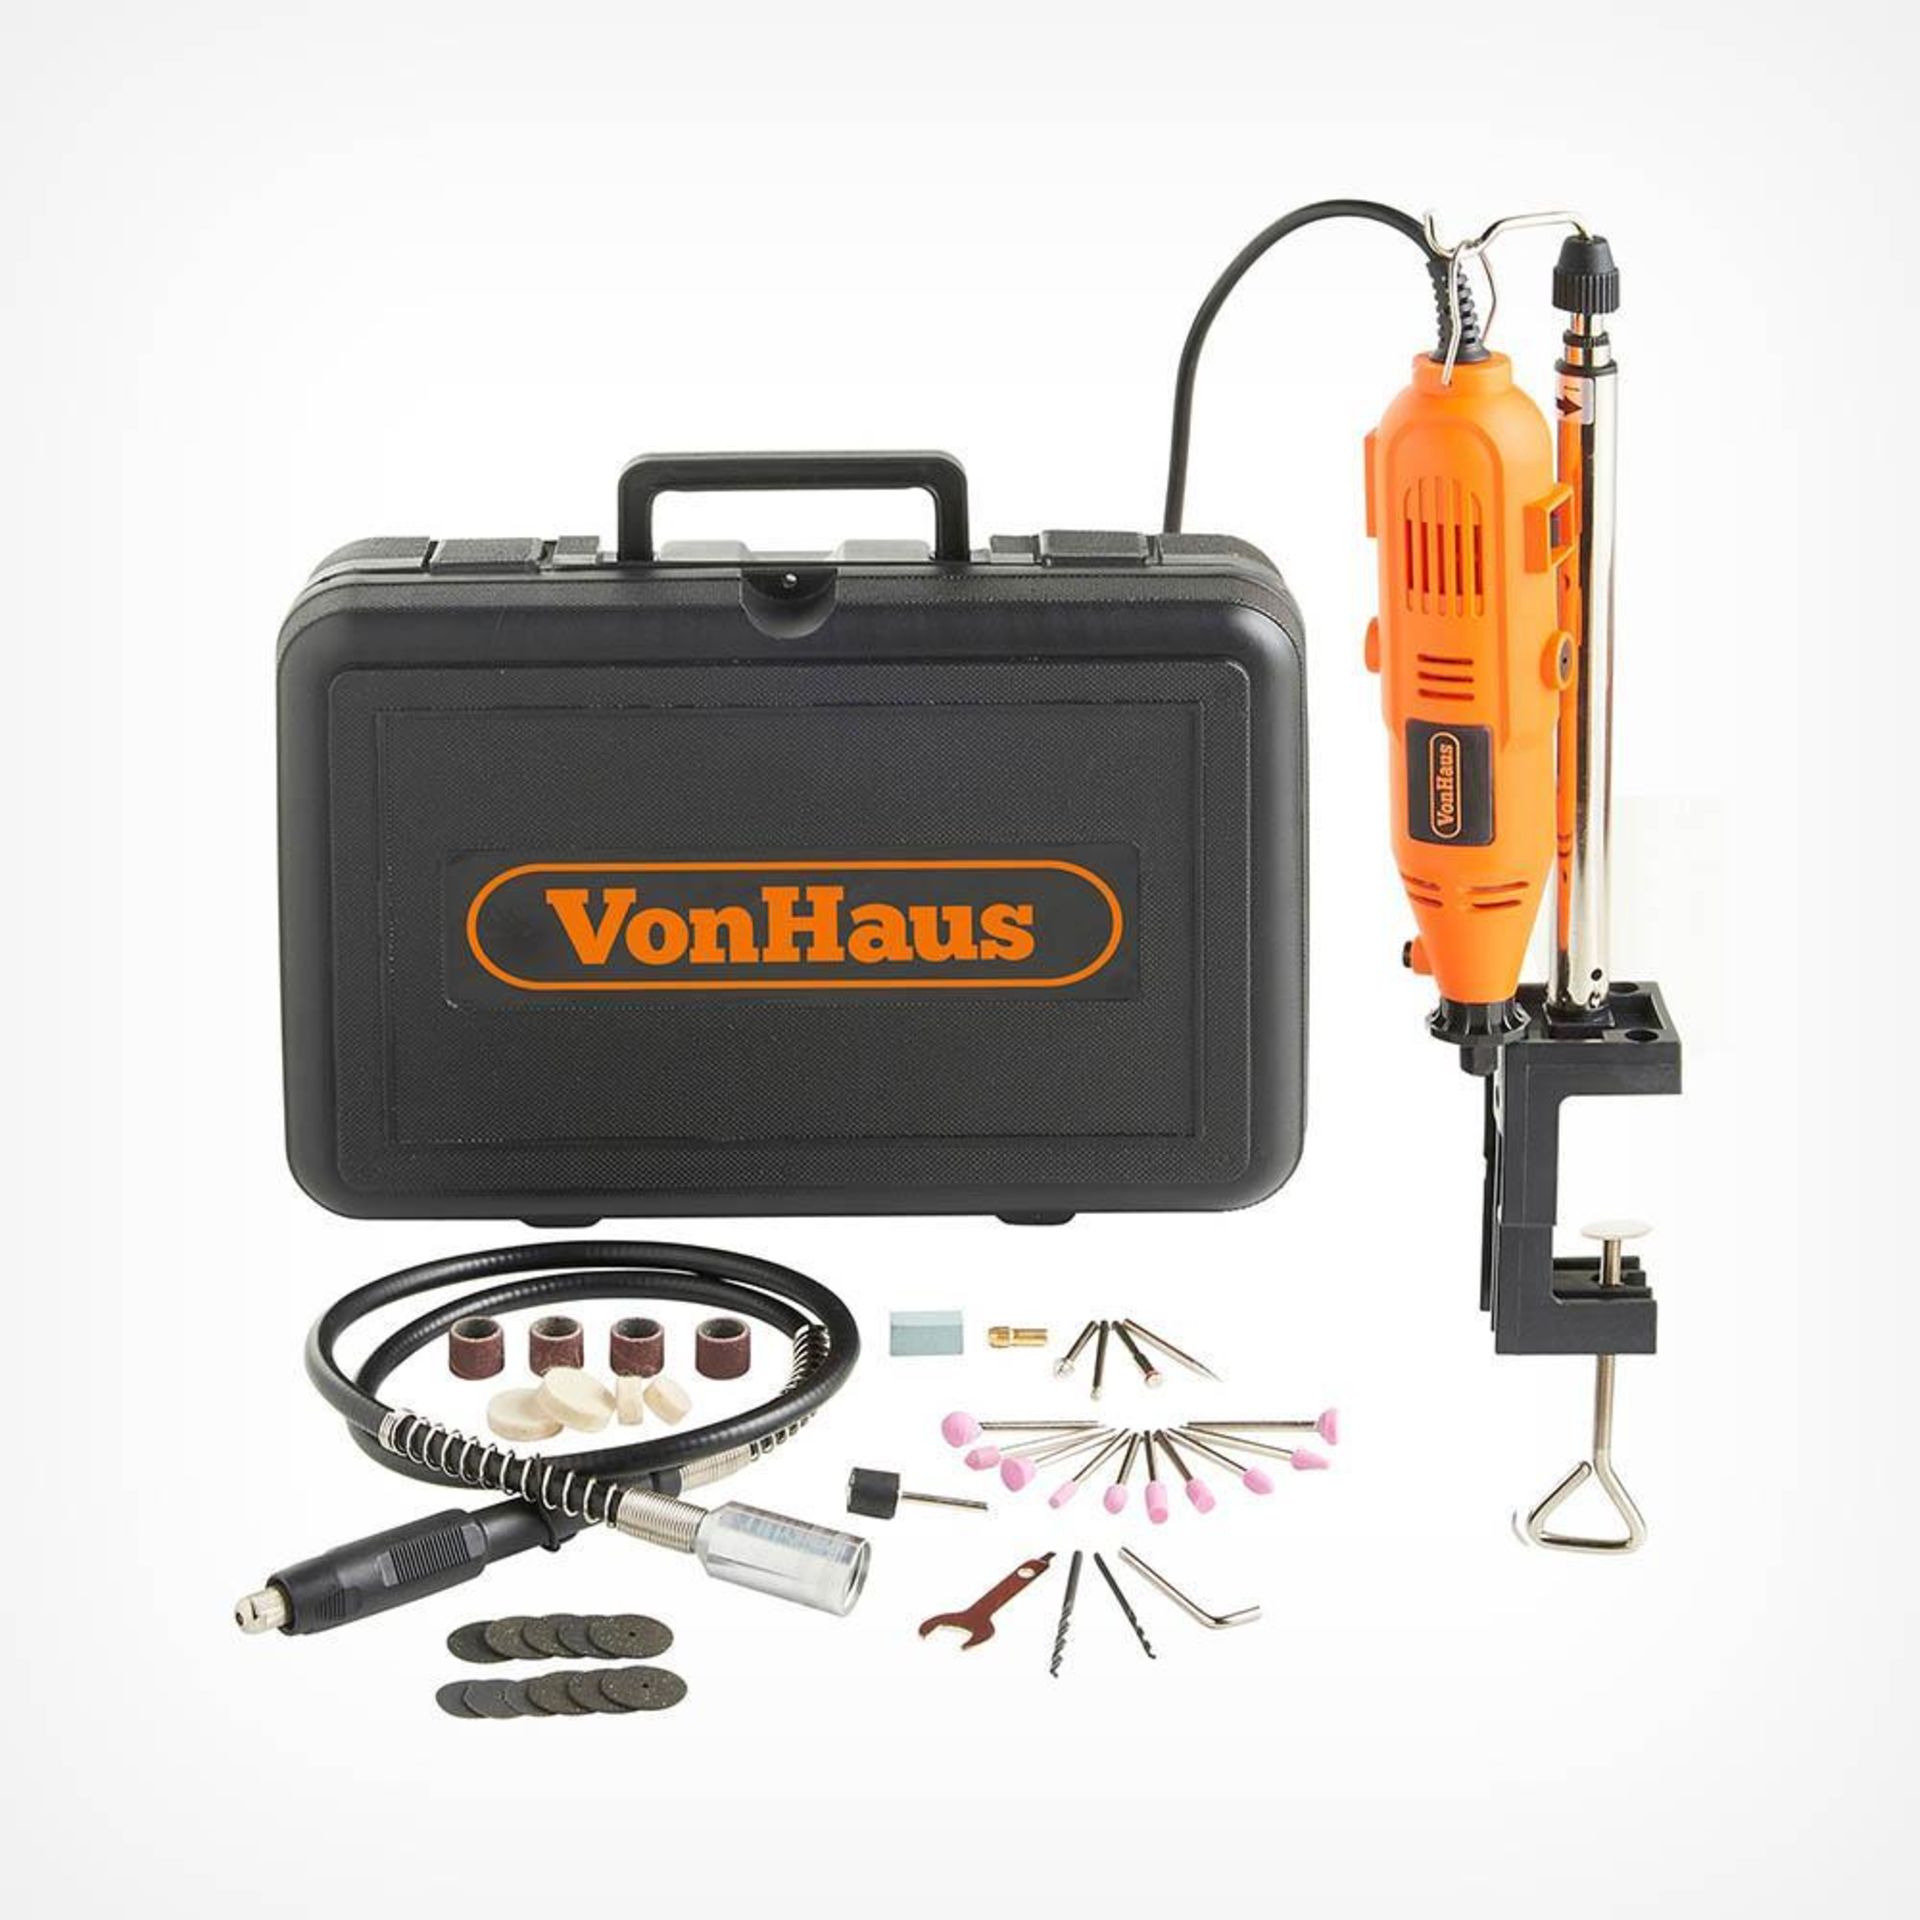 135W Multitool with Accessory Set - P2. Perfect for a host of jobs including chainsaw sharpening,